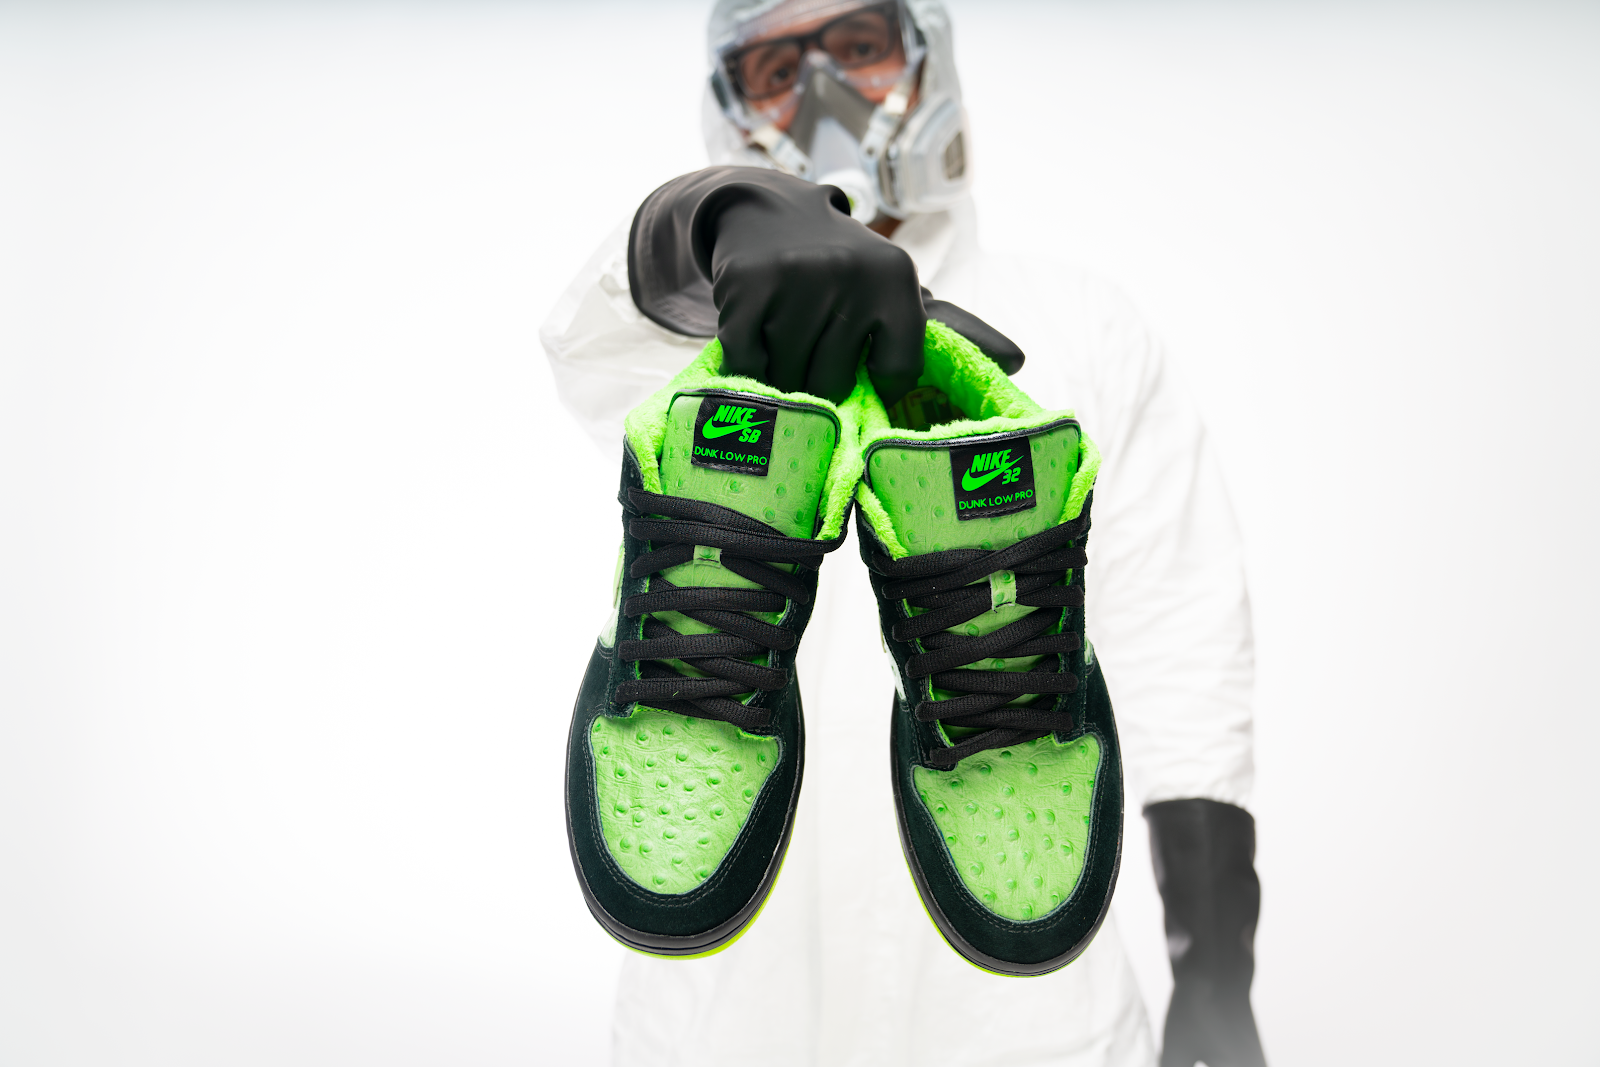 Barrios wears a hazard suit, face mask, and gloves while holding a pair of black and neon-green low-top Nikes.